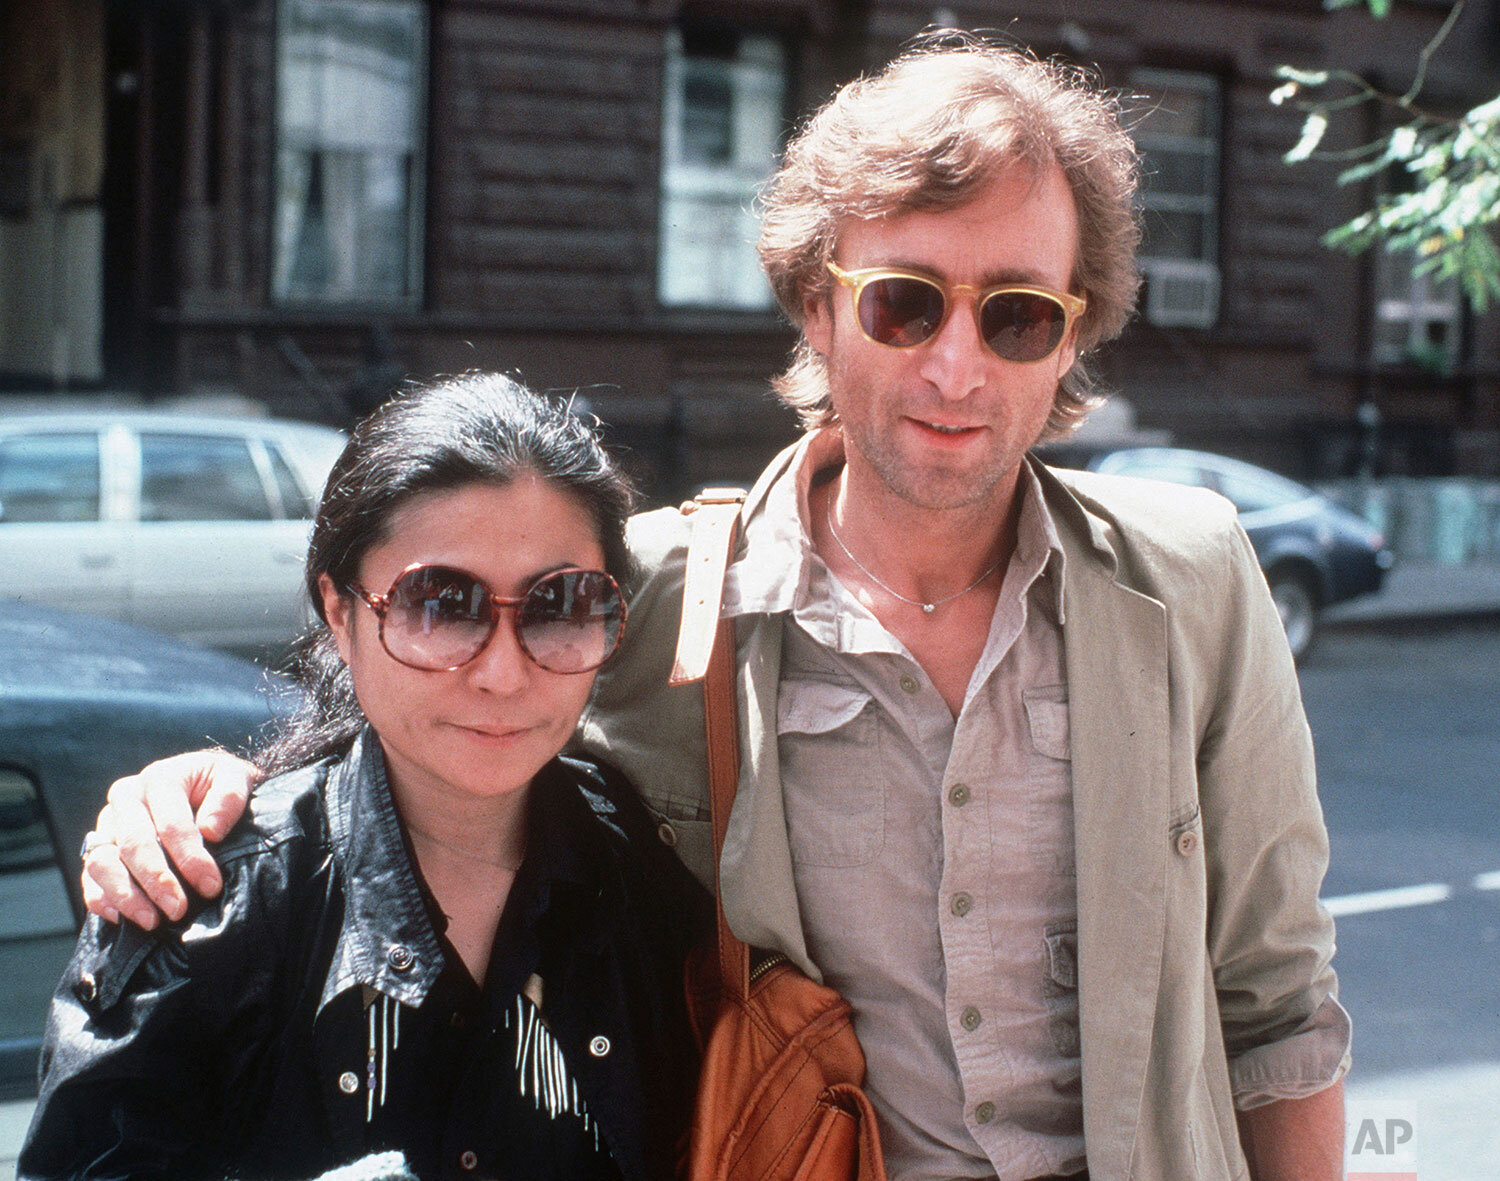  John Lennon, right, and his wife, Yoko Ono, arrive at The Hit Factory, a recording studio in New York City, Aug 22, 1980. (AP Photo/Steve Sands) 